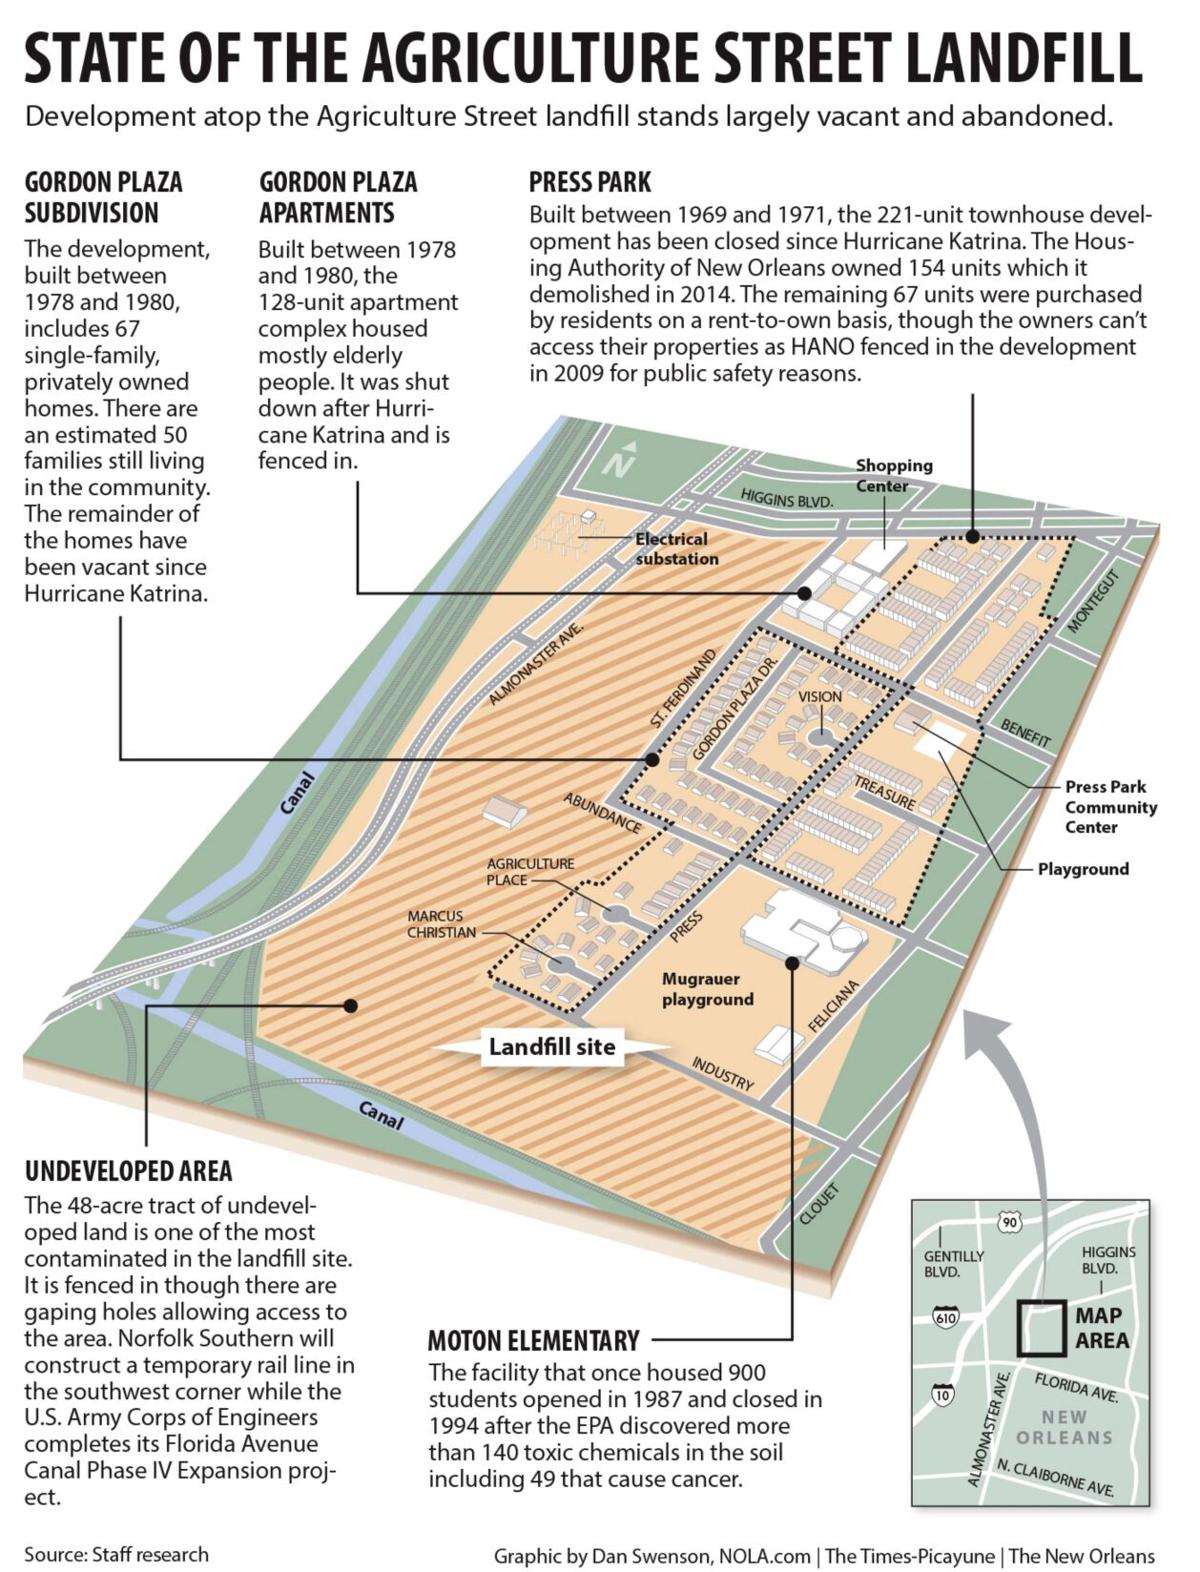 Agriculture Street landfill graphic.pdf